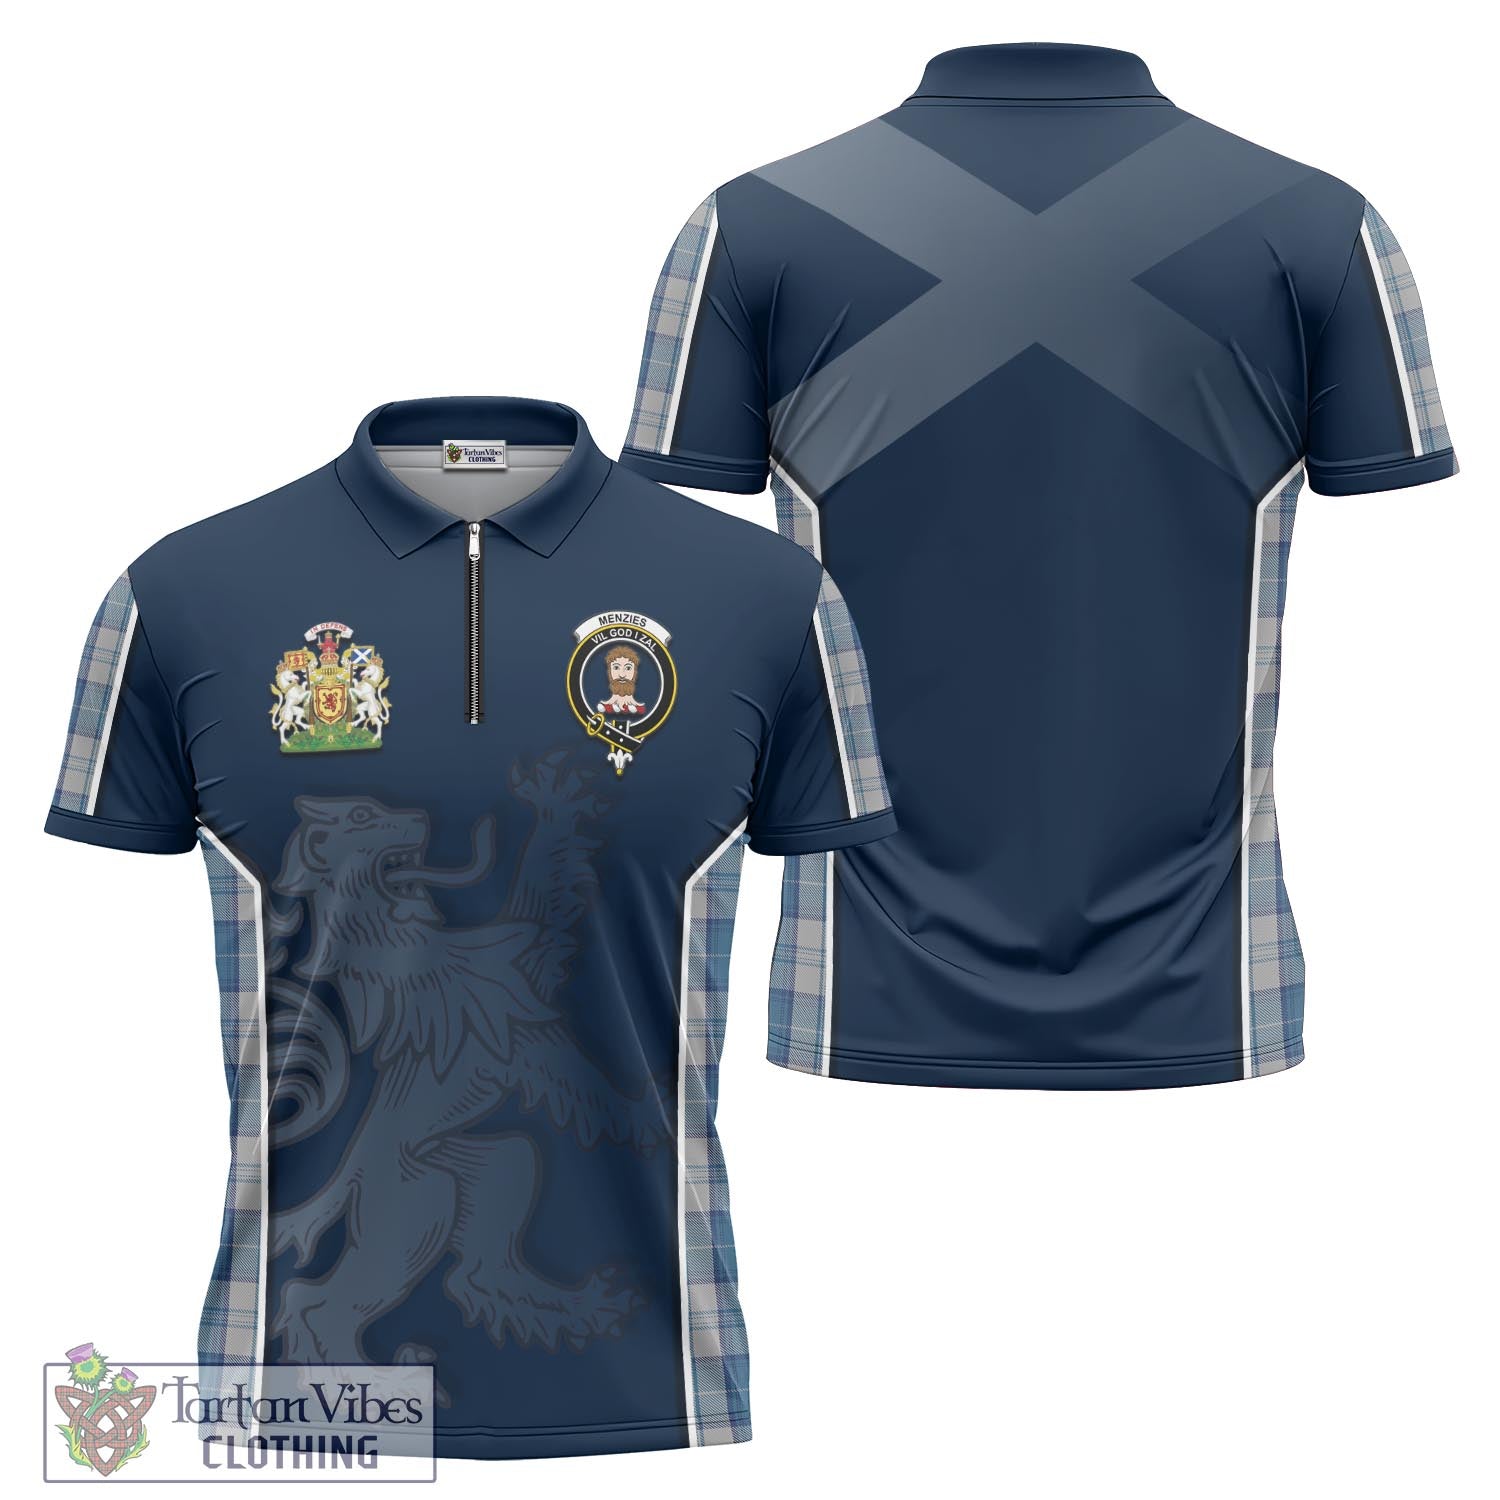 Tartan Vibes Clothing Menzies Dress Blue and White Tartan Zipper Polo Shirt with Family Crest and Lion Rampant Vibes Sport Style